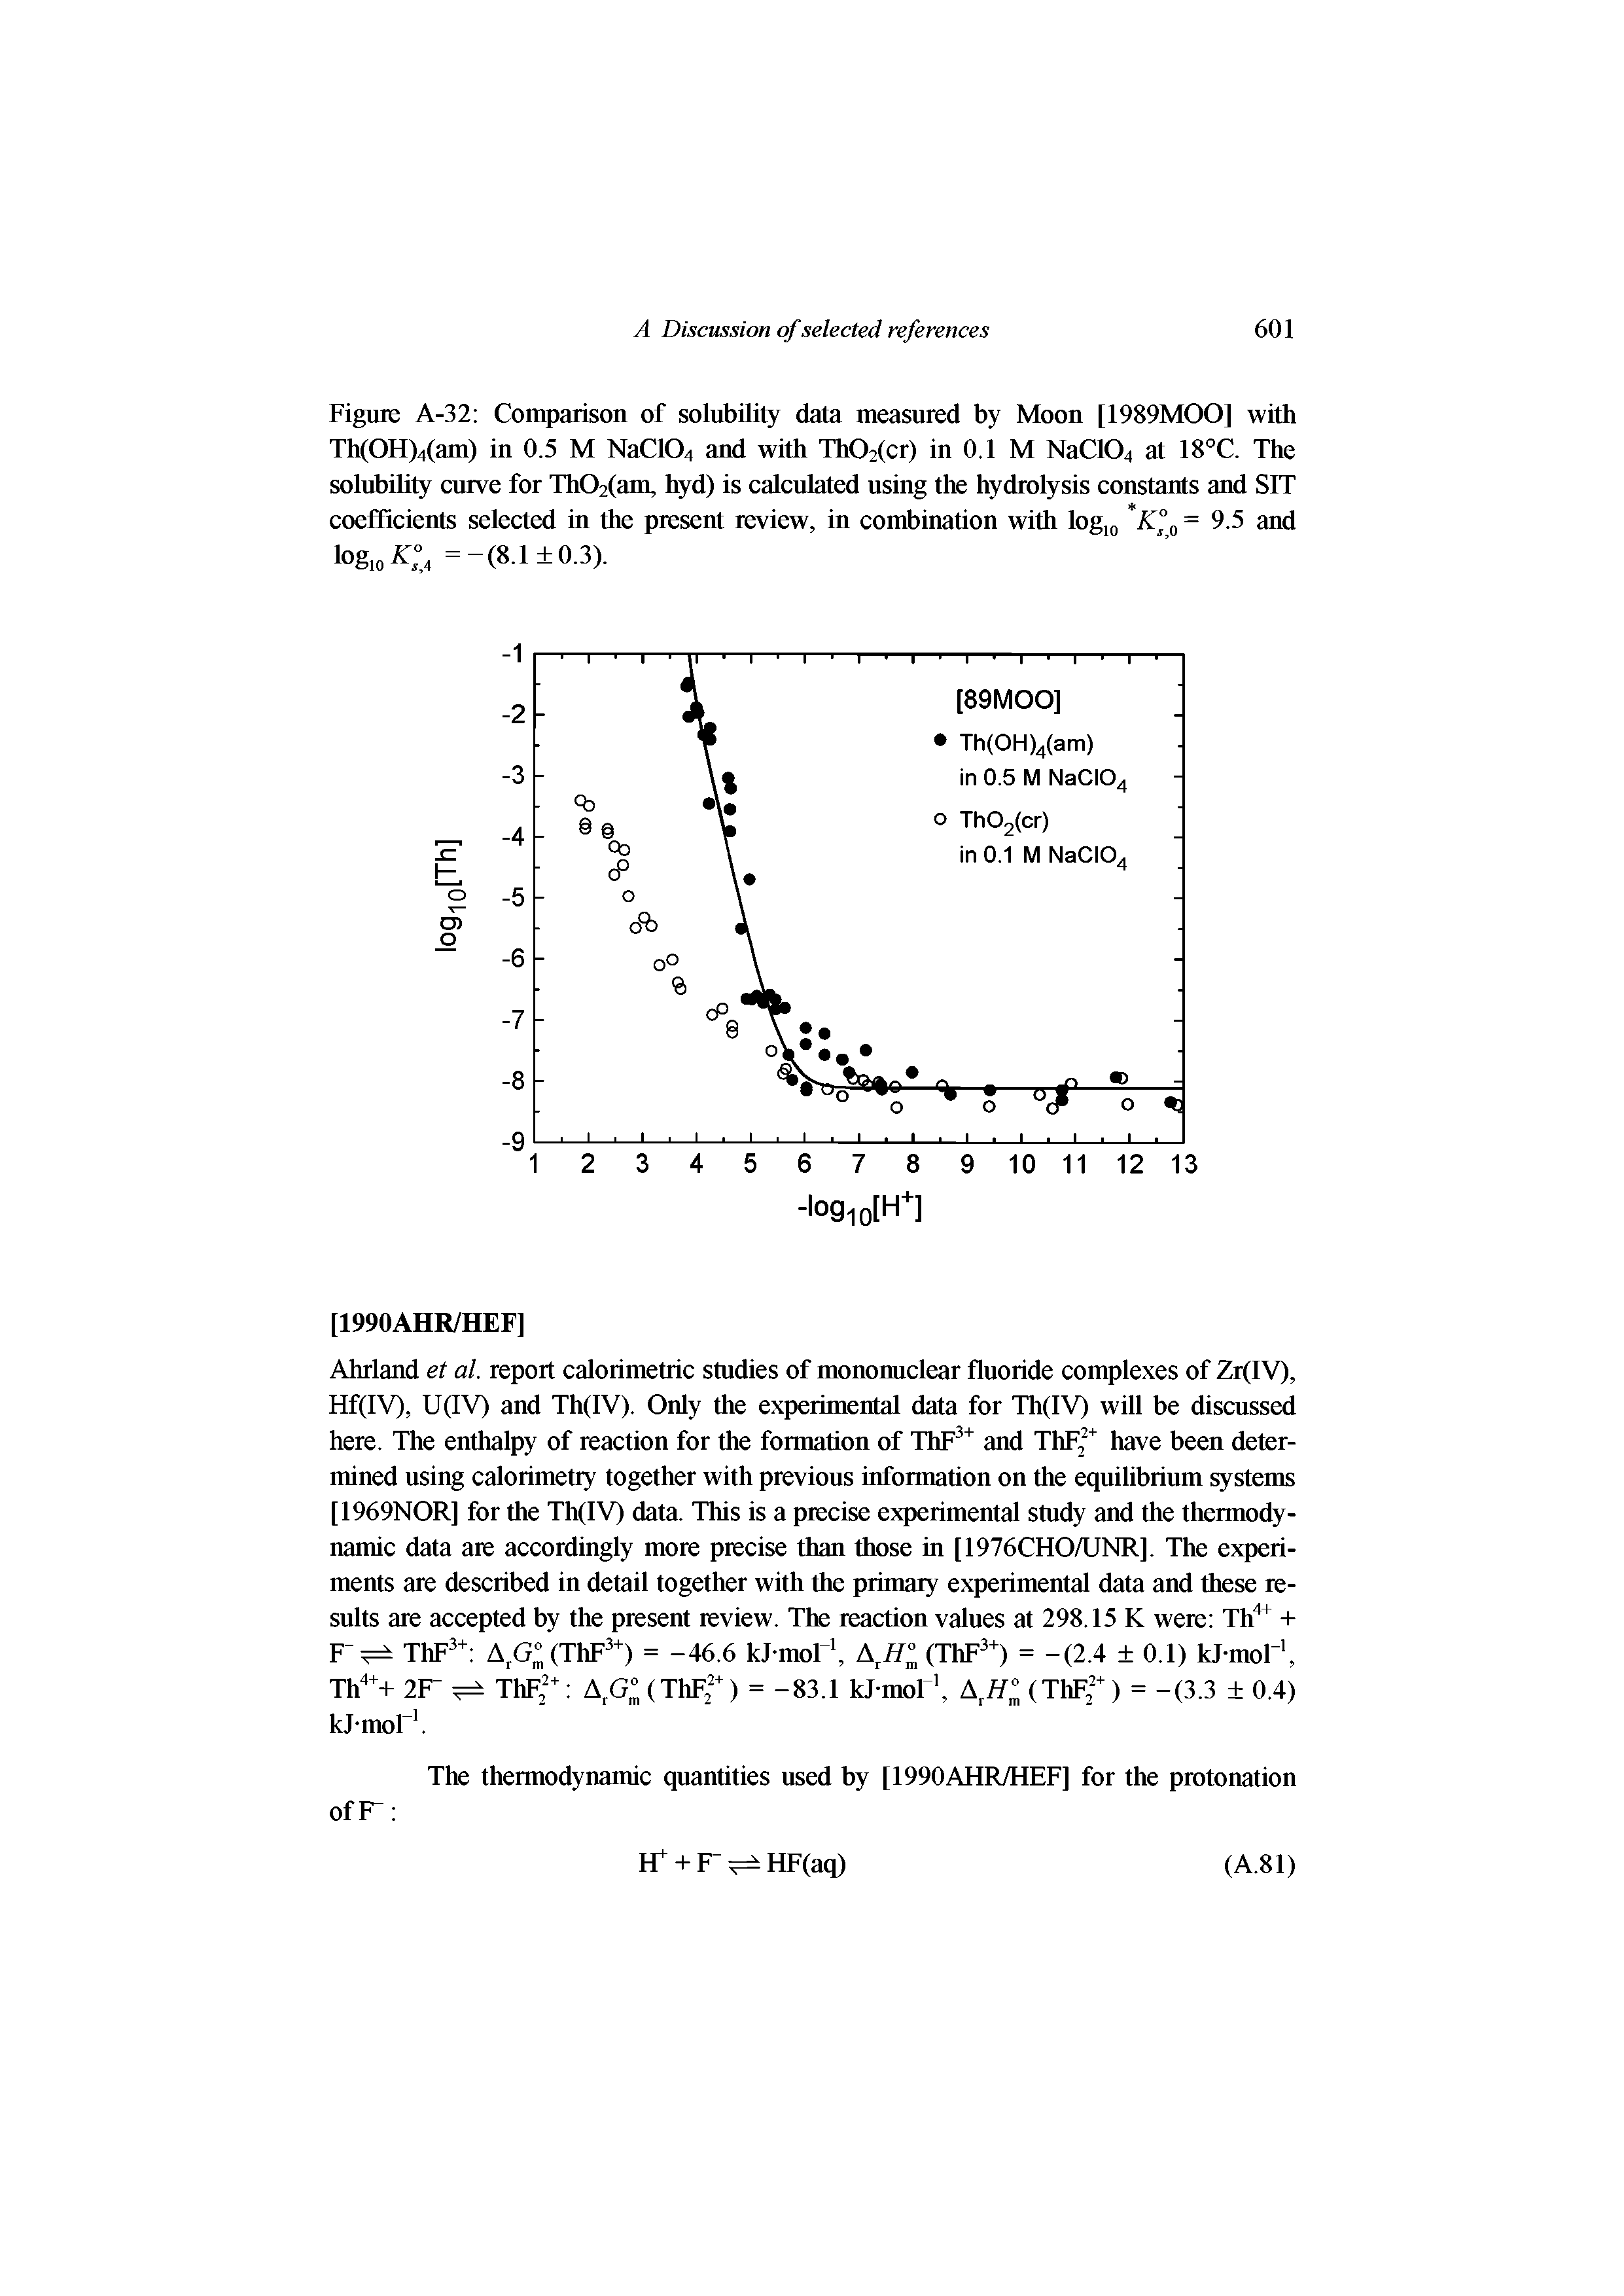 Figure A-32 Comparison of solubility data measured by Moon [1989MOO] with Th(OH)4(am) in 0.5 M NaC104 and with Th02(cr) in 0.1 M NaC104 at 18°C. The solubility curve for Th02(am, hyd) is calculated using the hydrolysis constants and SIT coefficients selected in the present review, in combination with logj Kl,= 9.5 and log, ° =-(8.1+0.3).